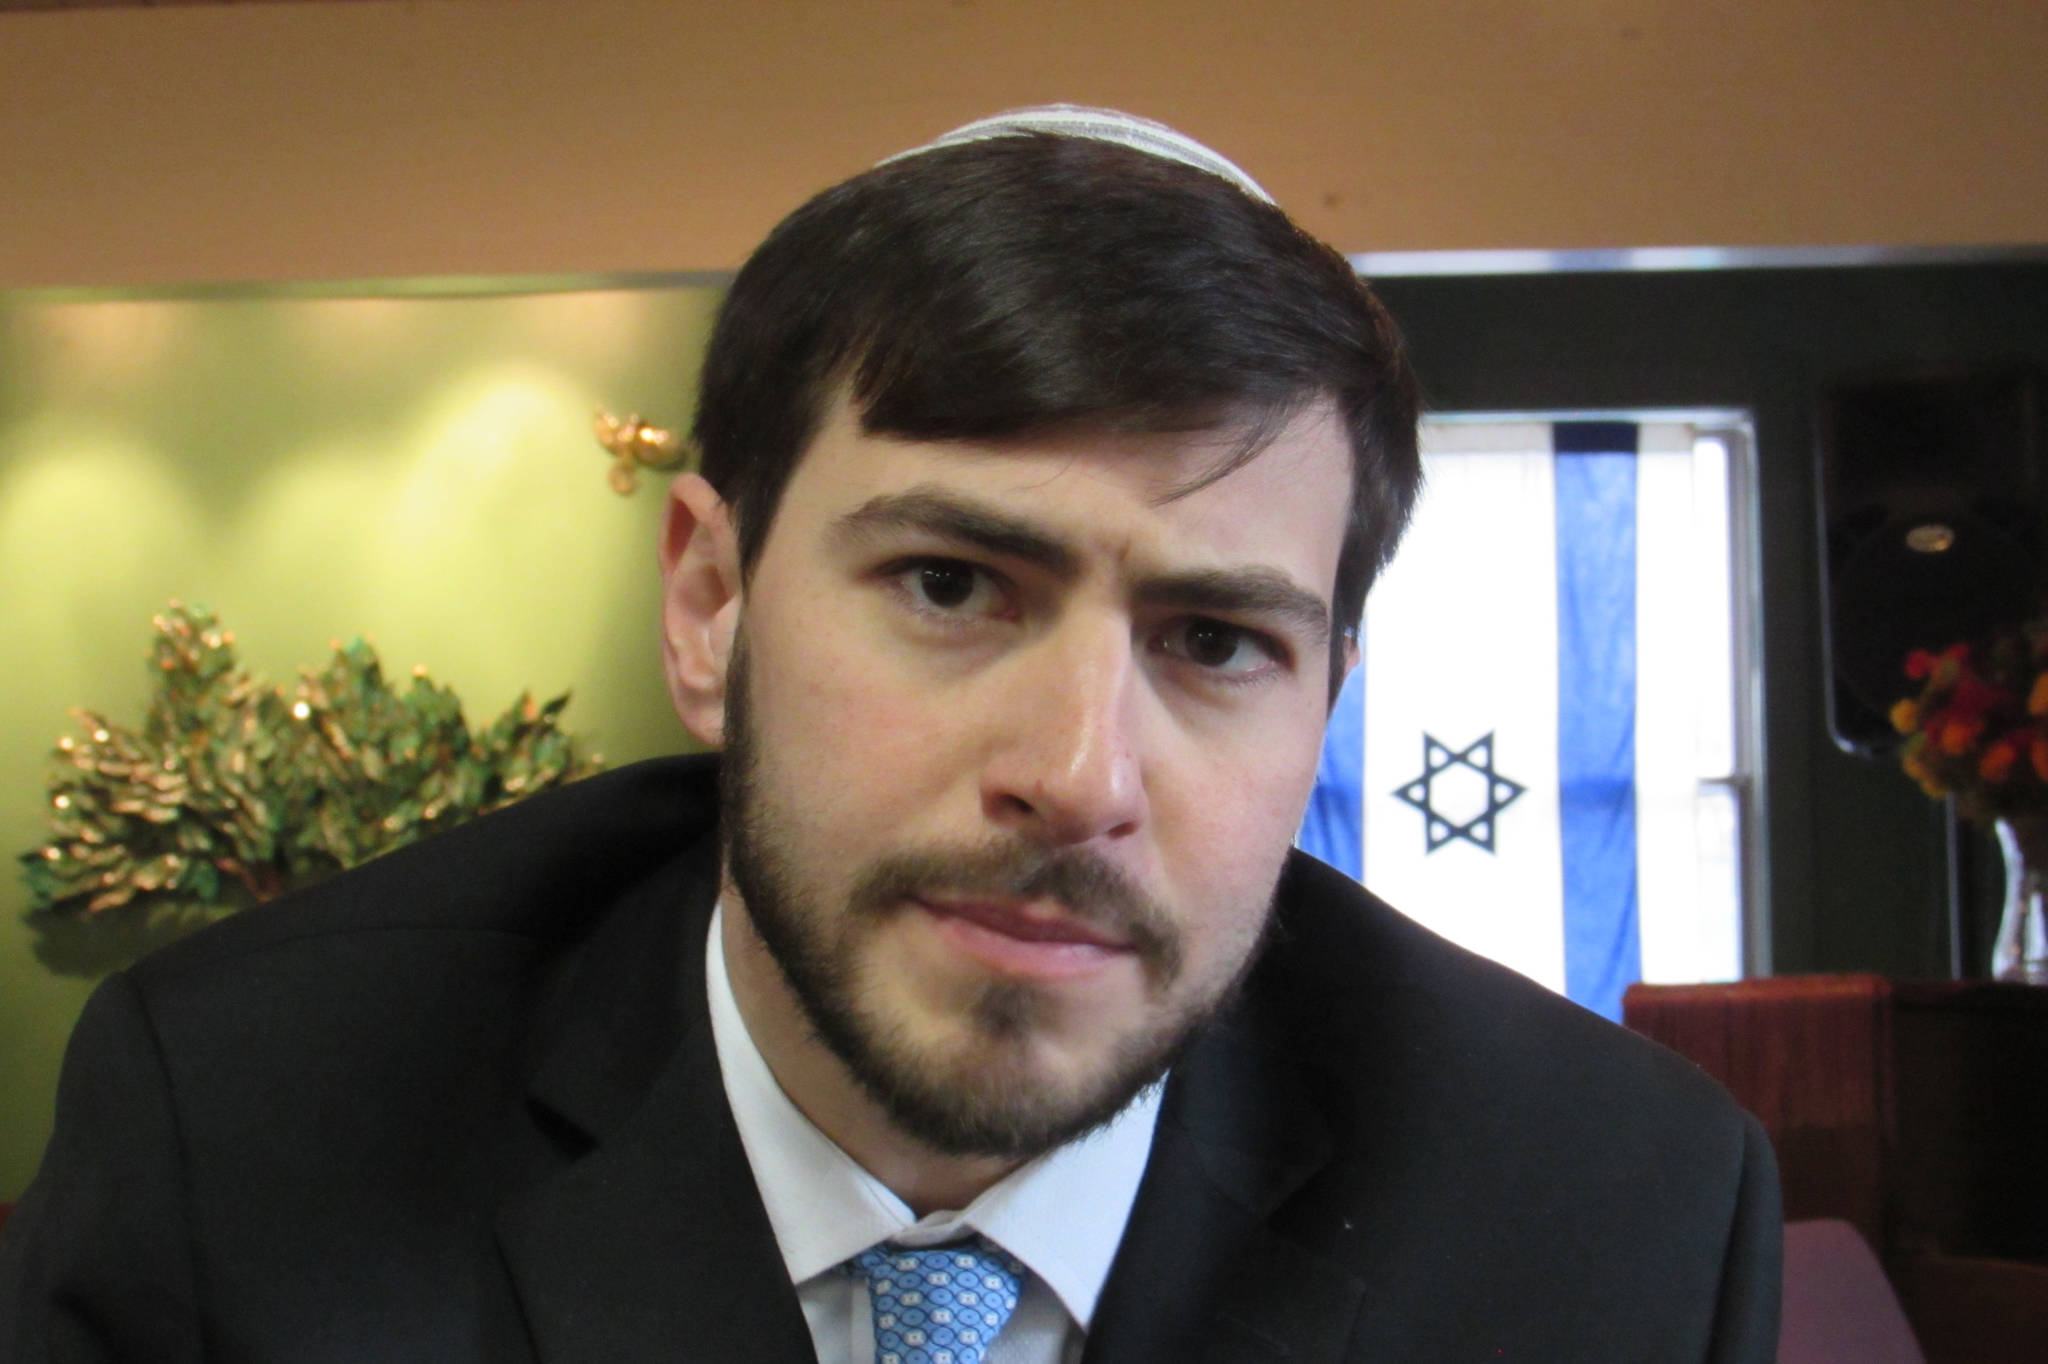 Jeff Dreifus, a rabbinical student from New York who serves as a rabbi for Juneau’s Congregation Sukkat Shalom, talks about the Jewish holiday Purim and its traditions, Friday, March 15, 2019. (Ben Hohenstatt | Juneau Empire)